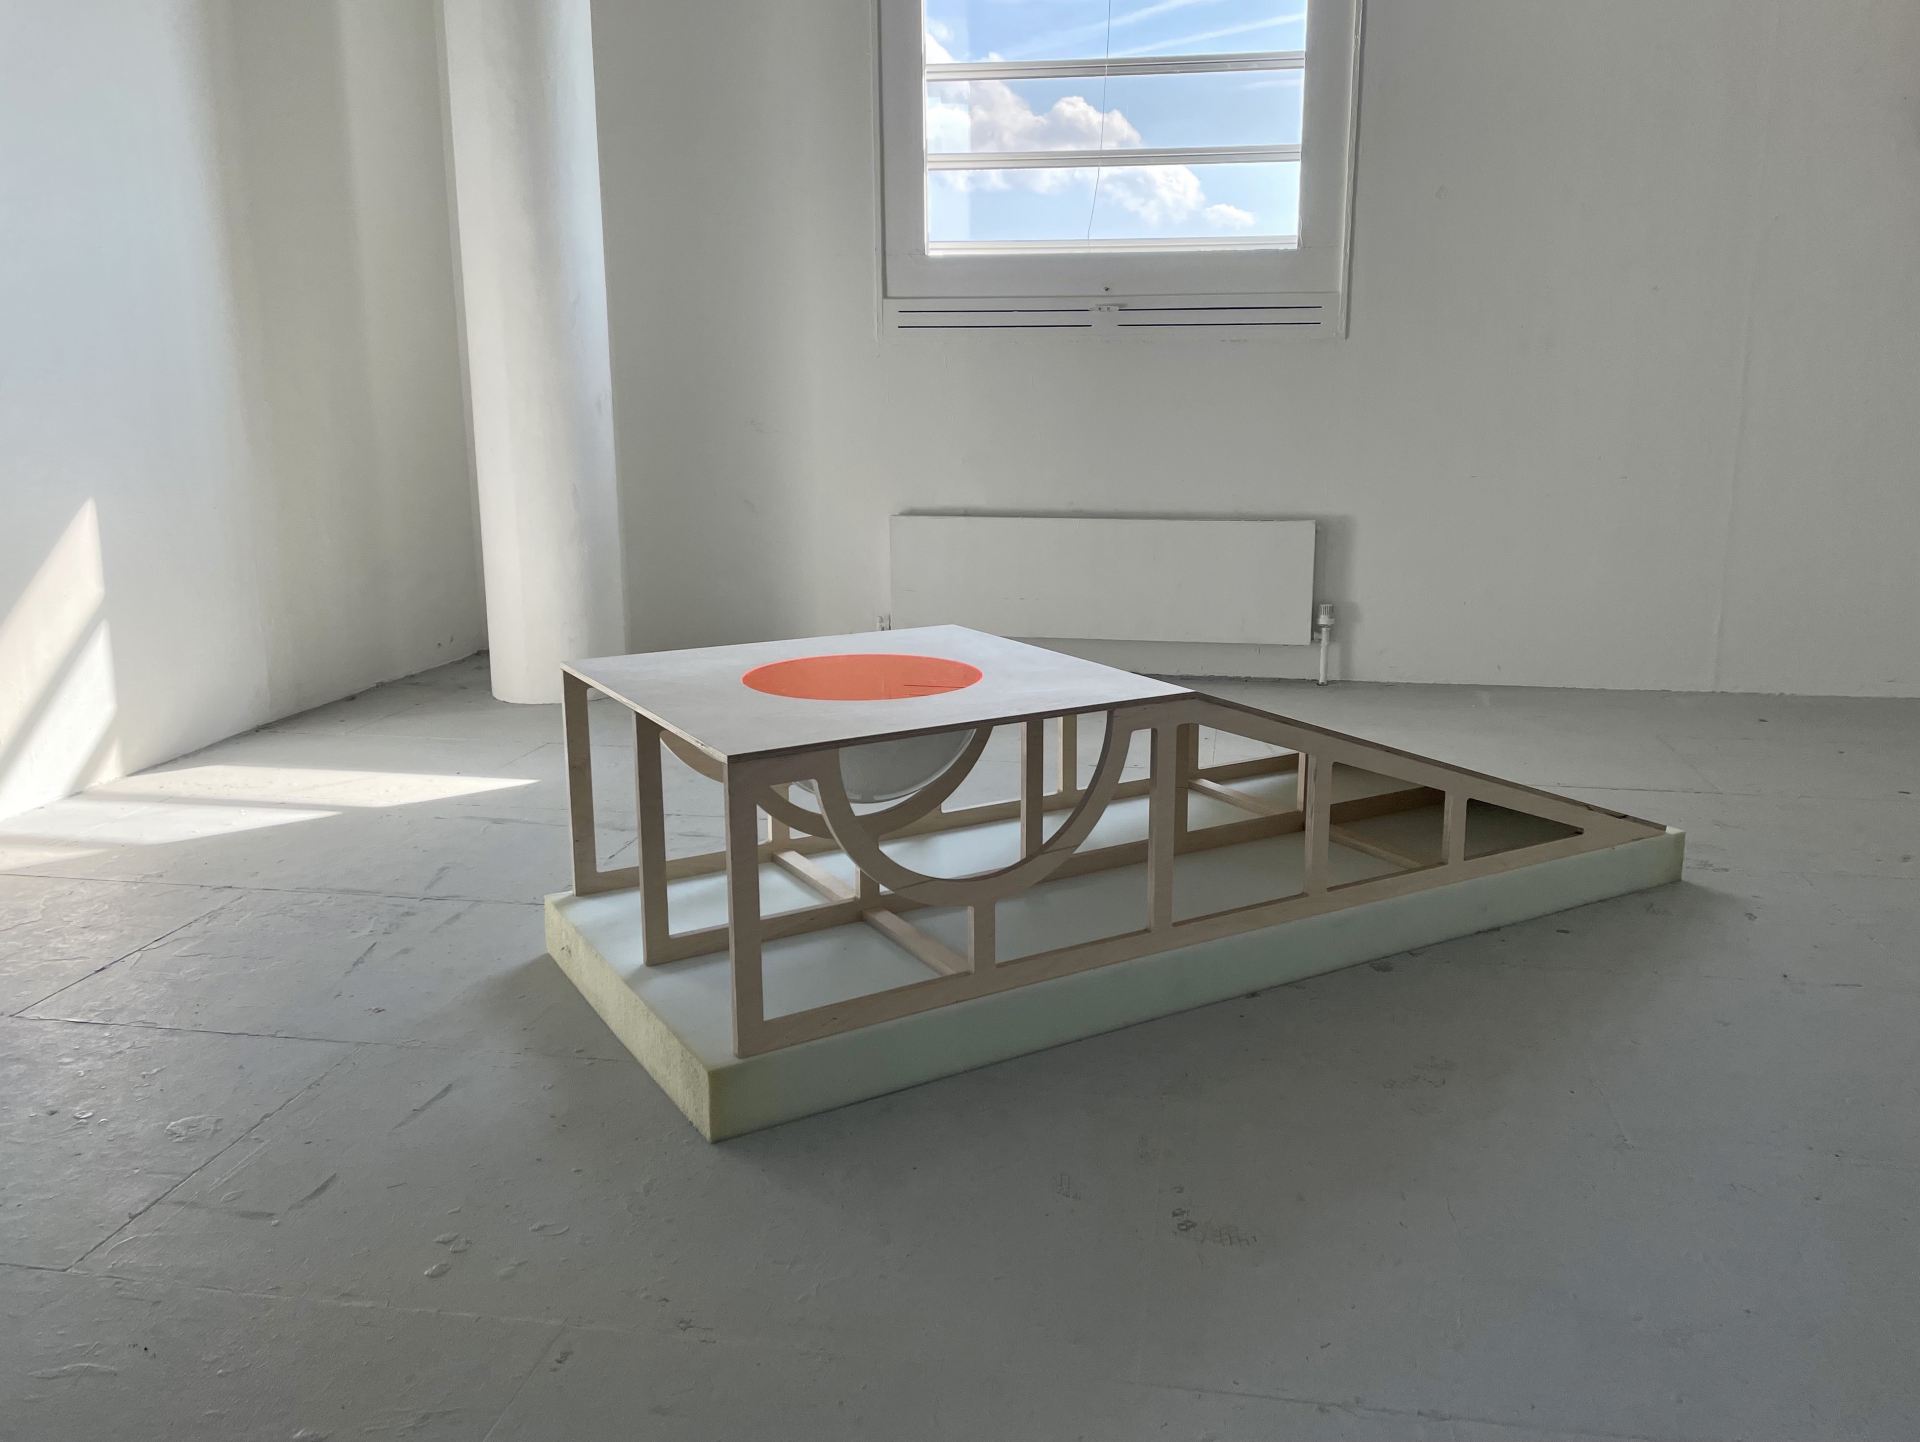 A sculpture of a wooden table-like object with a ramp standing in a room.